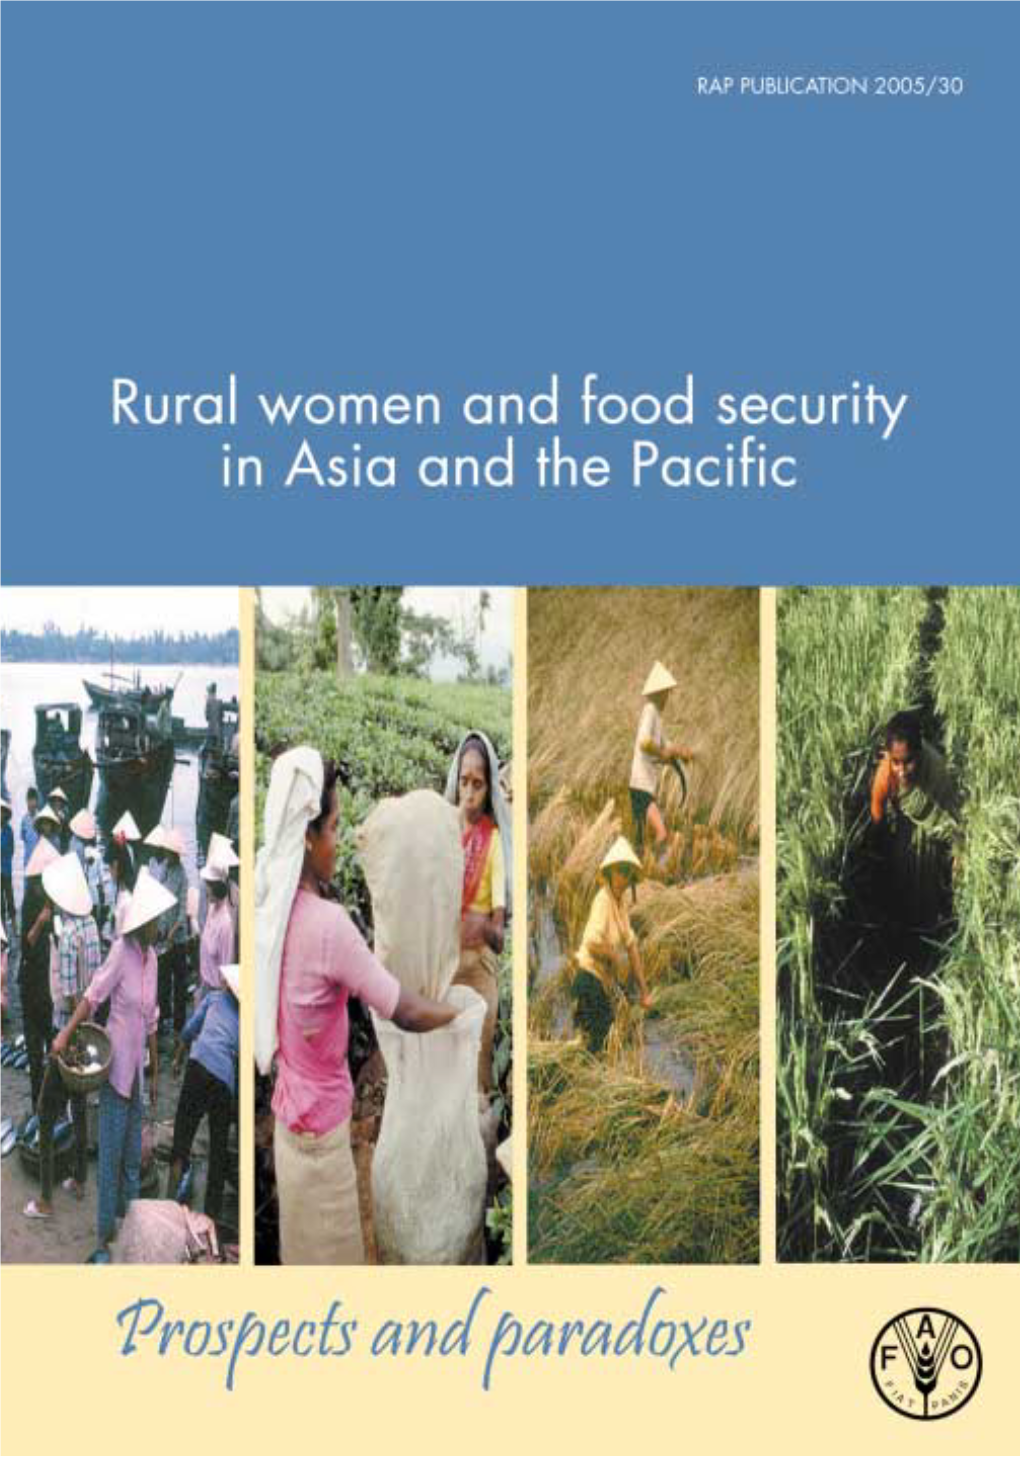 Food Security and Rural Women